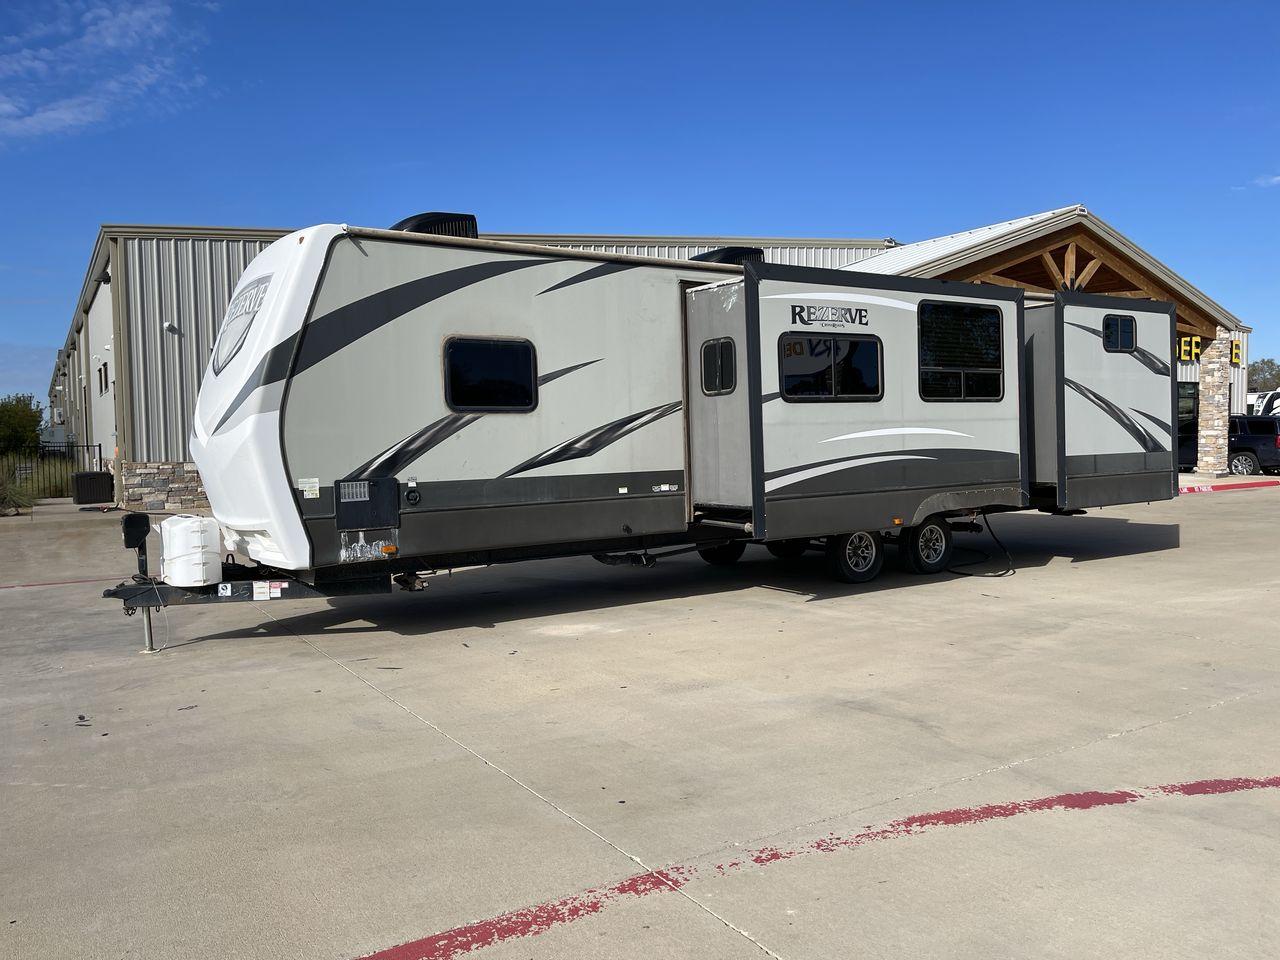 2017 WHITE VOLANTE RTZ33BH (4V0TC3327HB) , Length: 36.58 ft. | Dry Weight: 8,864 lbs. | Gross Weight: 10,250 lbs. | Slides: 3 transmission, located at 4319 N Main Street, Cleburne, TX, 76033, (817) 221-0660, 32.435829, -97.384178 - The 2017 VOLANTE RTZ33BH offers a spacious interior with a layout that is perfect for families or large groups. Its length of 33 feet offers ample room for your adventures. Inside, you'll find a comfortable sleeping space with a bunkhouse layout, making it suitable for family trips. The bunkhouse la - Photo #22